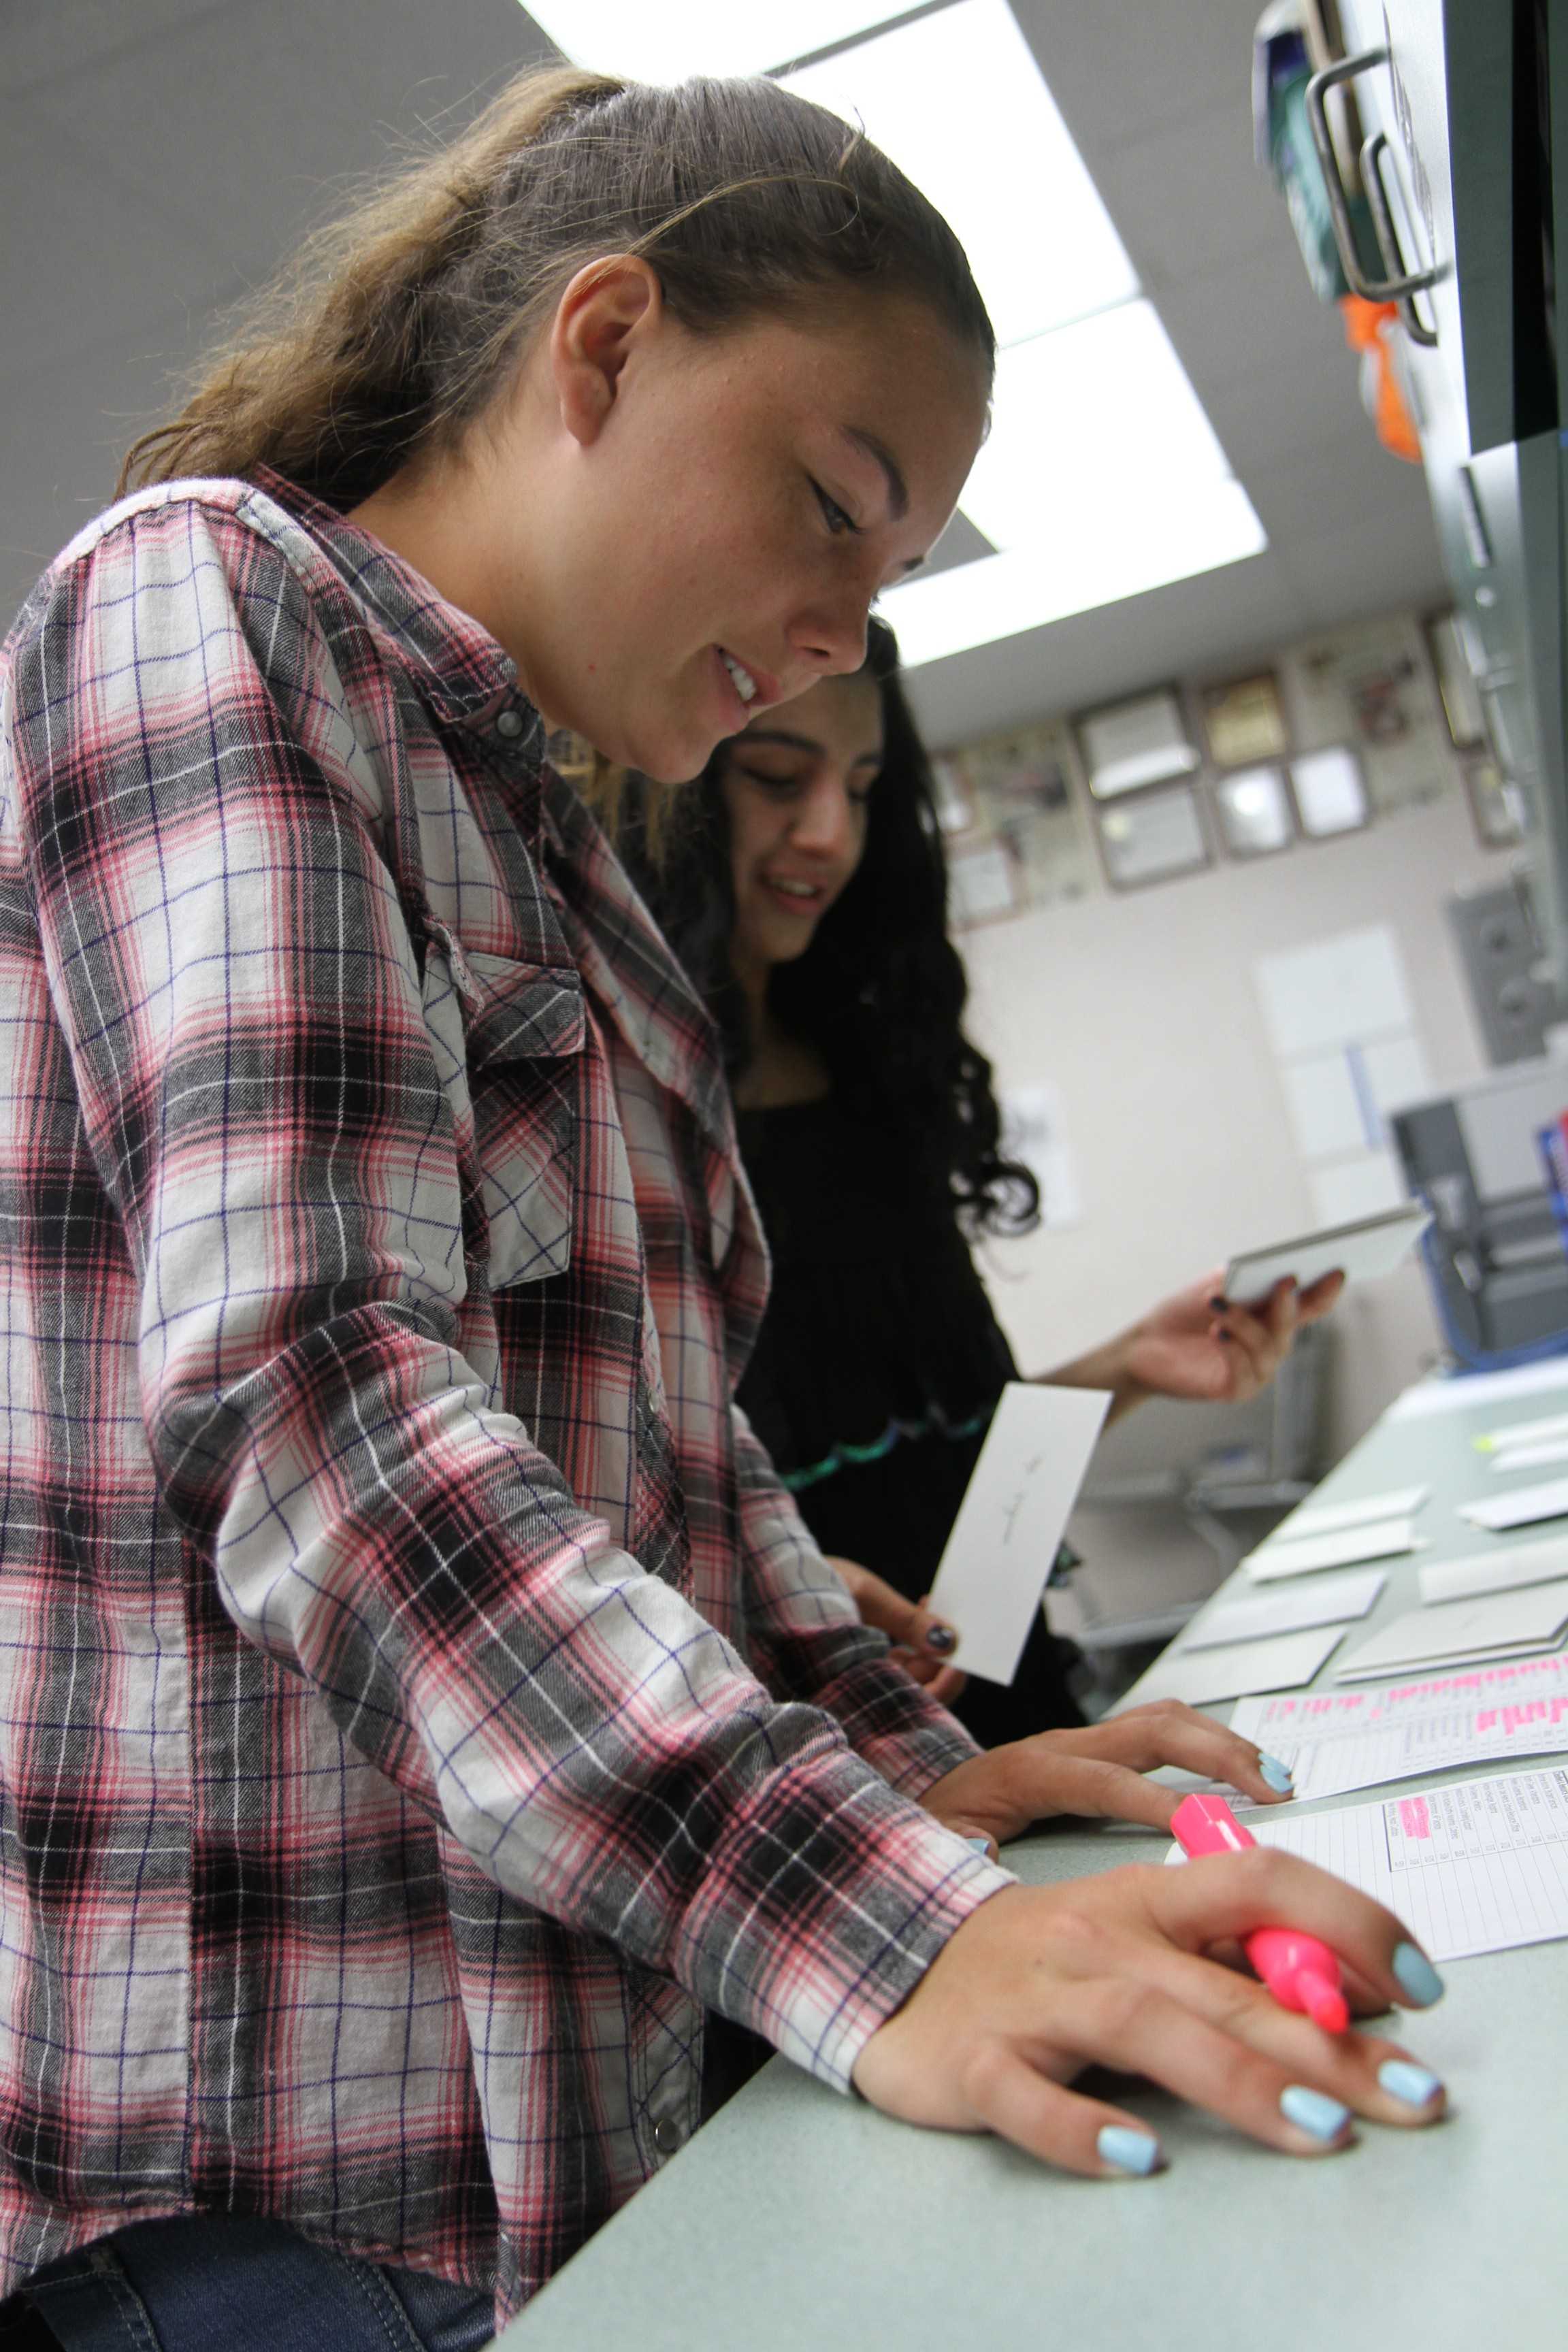 In Mrs. Bernadette Cranmer’s yearbook class, staff member Lindsay Withrow (9) and Ambreen Siddiqui (11) help each other sort thank you letters to all of the teachers in alphabetical order. As the making of the 2014-2015 yearbook comes to an end, the whole staff wrote 113 letters collectively. Some of the staff feel like they are giving teachers recognition for the extra effort and support, for without them Ursus would’ve never been able to finish the book. “It felt good to give [the teachers and staff] thank you letters because it’s saying ‘thanks for putting up with us’ because we pull their students out during class throughout the year,” Siddiqui said. Photo by Janelle Cruz